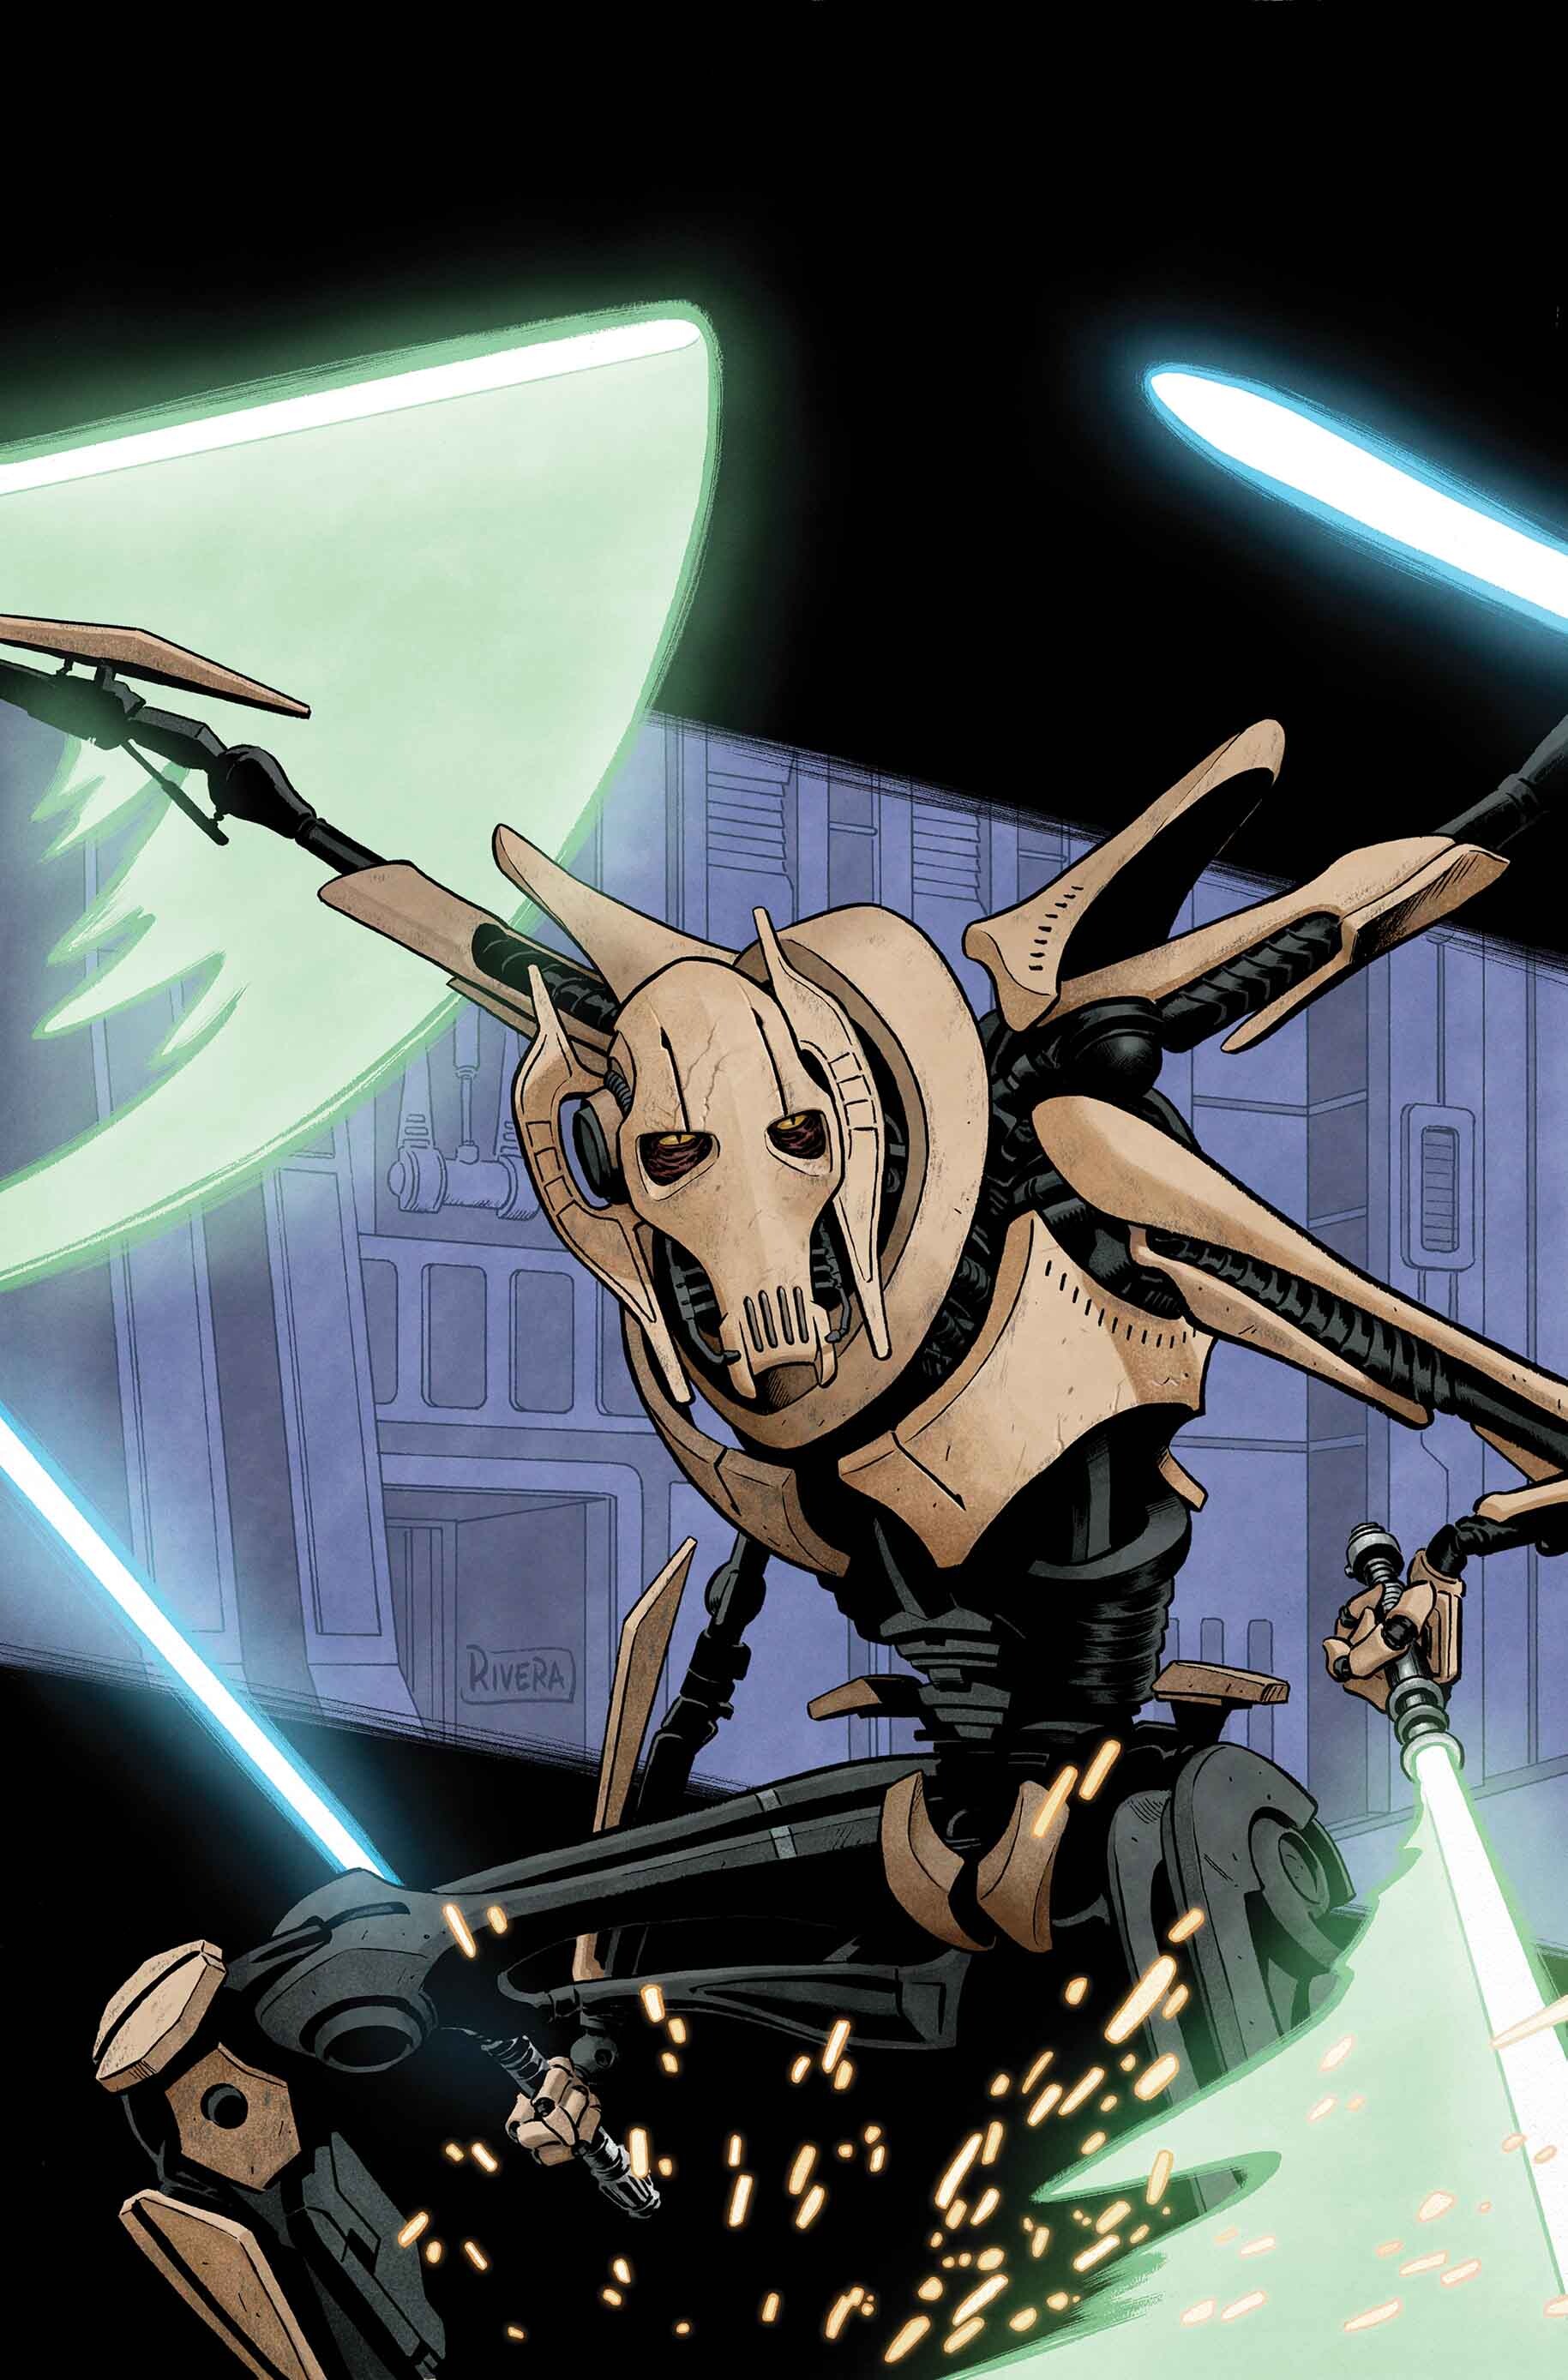 General Grievous: A rivalry with Jedi Master Obi-Wan Kenobi, Final confrontation in Revenge of the Sith. 1830x2780 HD Wallpaper.